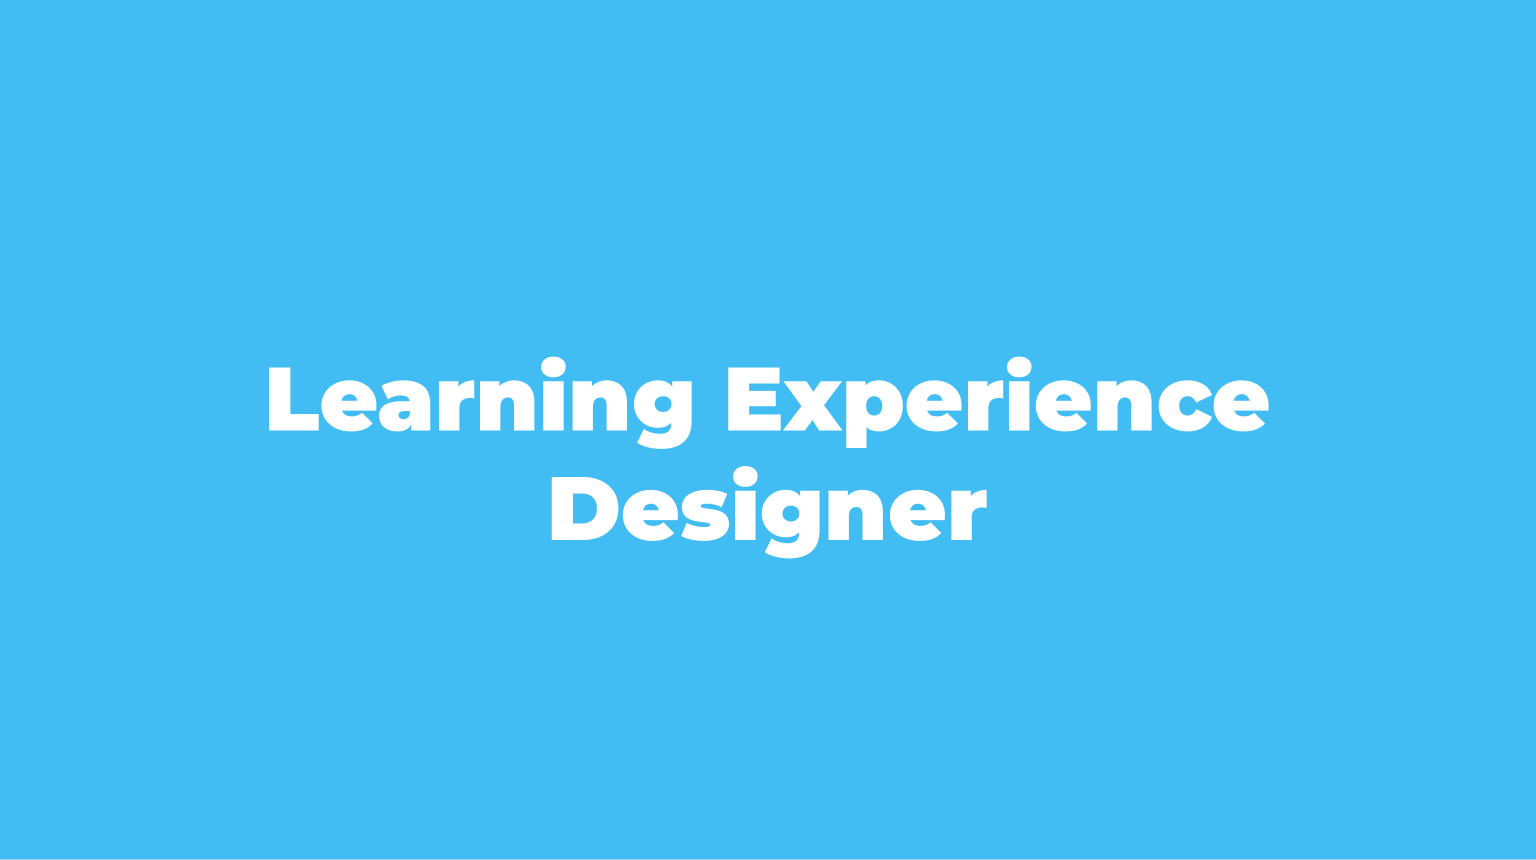 Learning Experience Designer